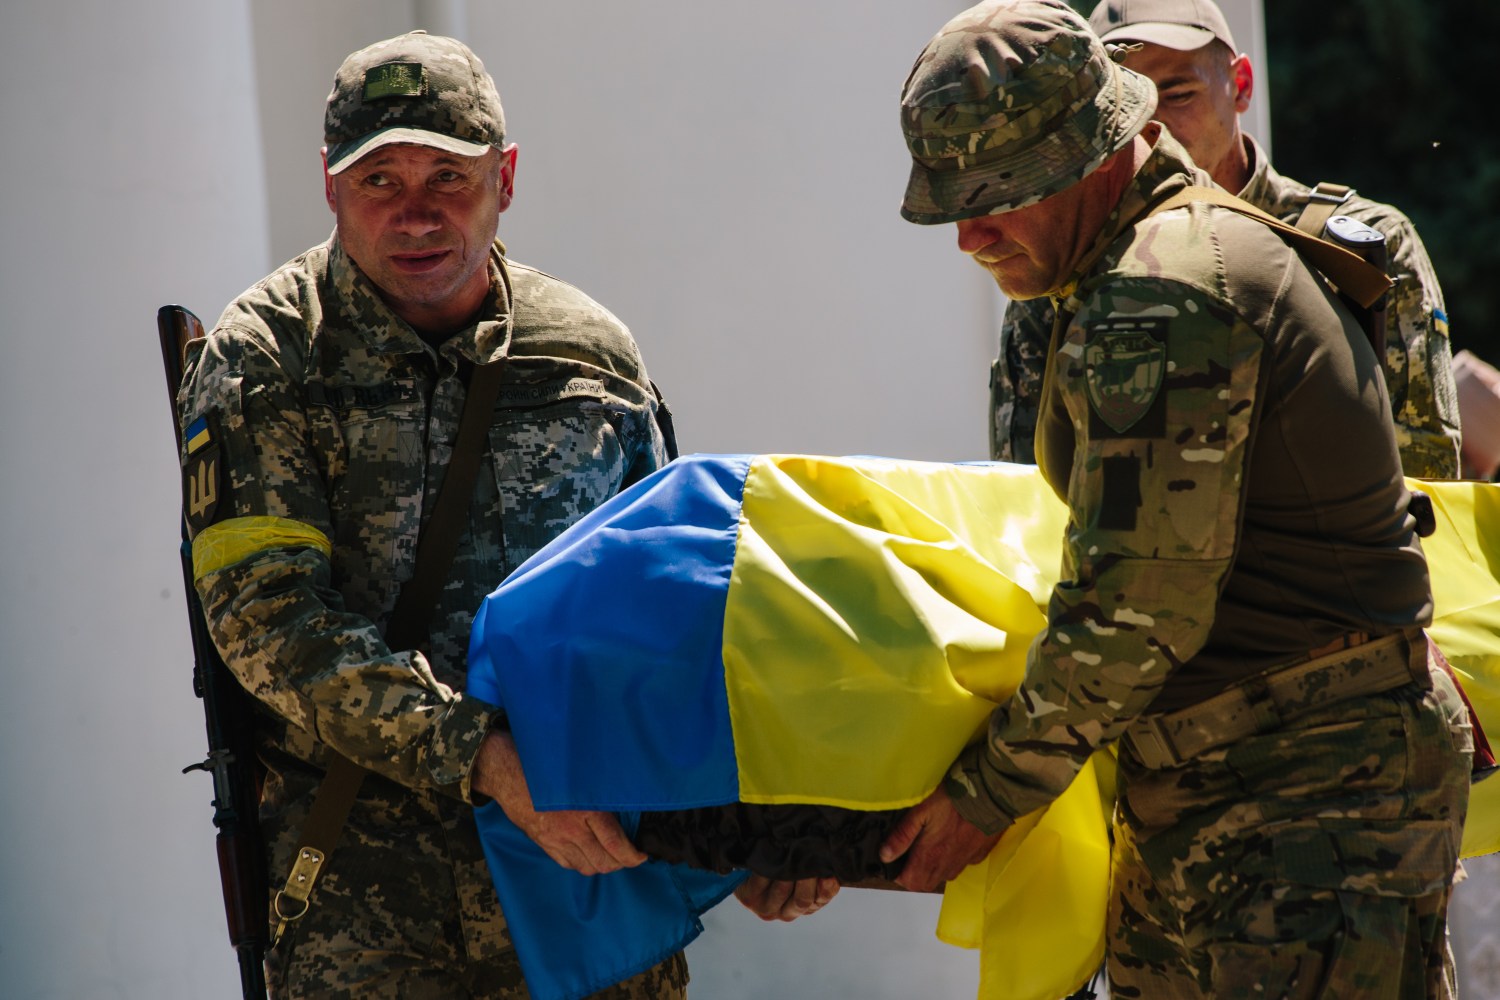 The Armed Forces of Ukraine are carrying the coffin of the dead Ukrainian serviceman in Poltava, Ukraine, on June 10, 2022. (Photo by Pavlo Pakhomenko/NurPhoto)